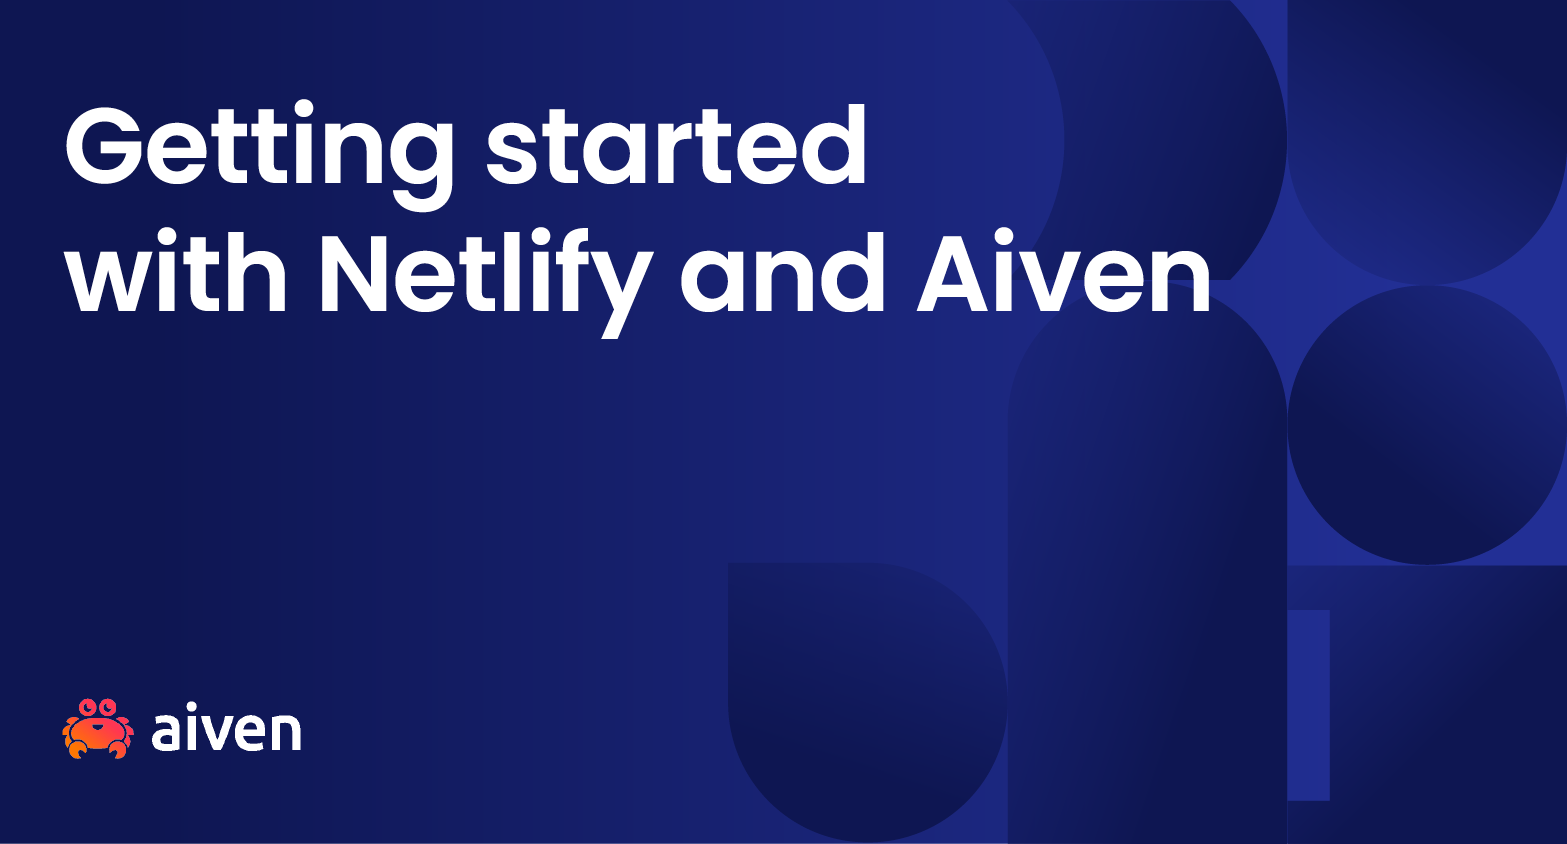 The words "getting started with Netlify and Aiven" in white on a blue background with abstract shapes on it. The Aiven logo is in the bottom left.